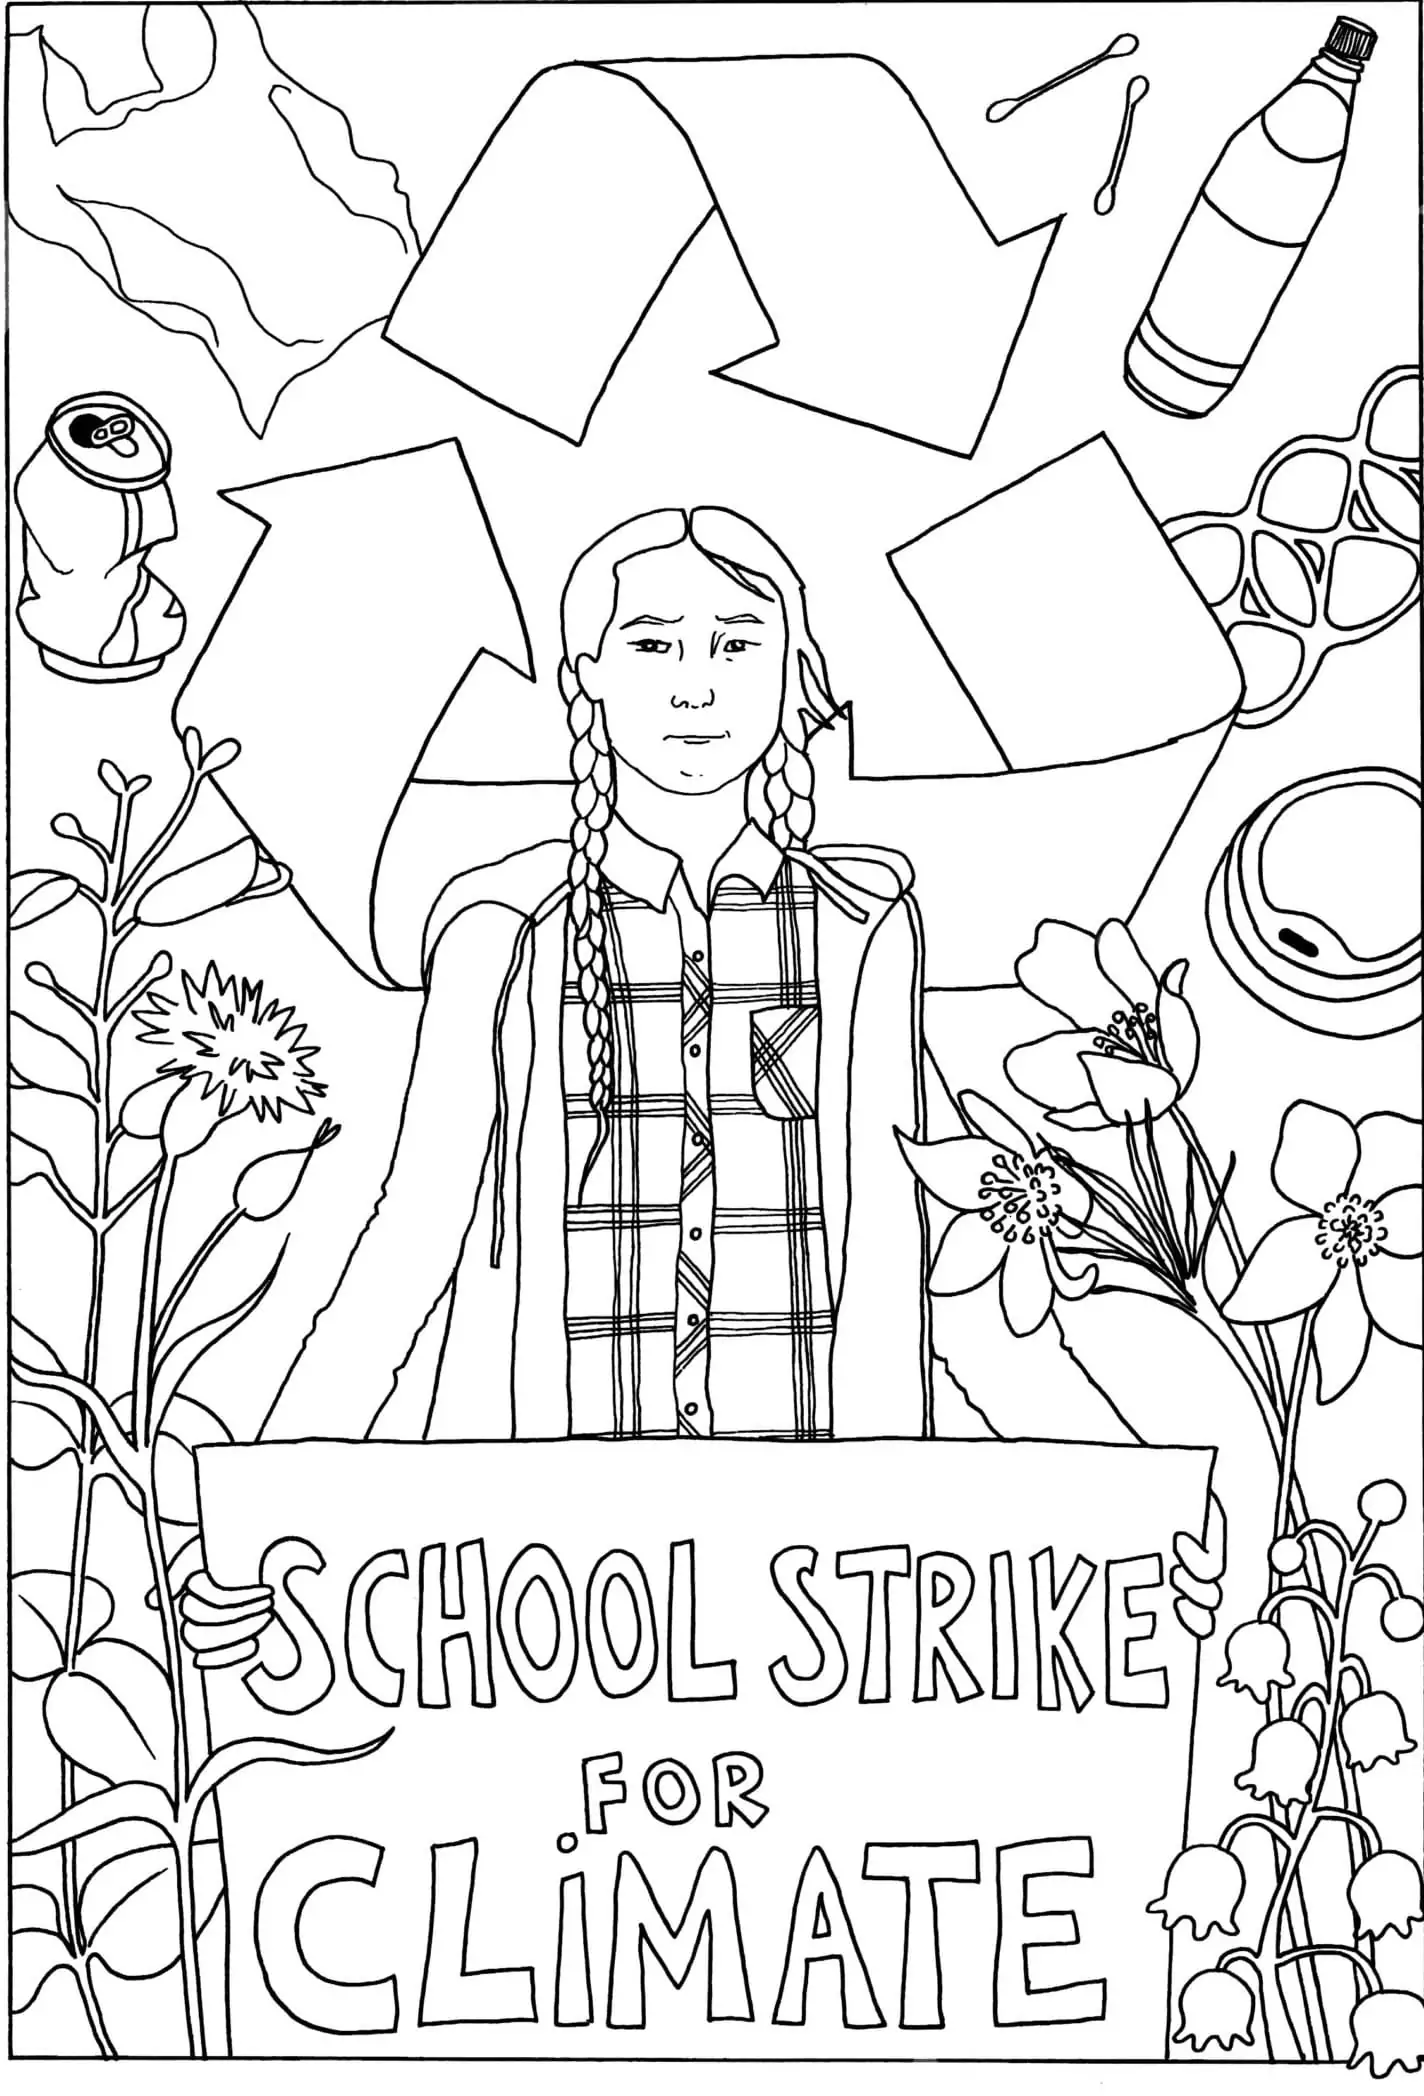 School Strike for Climate